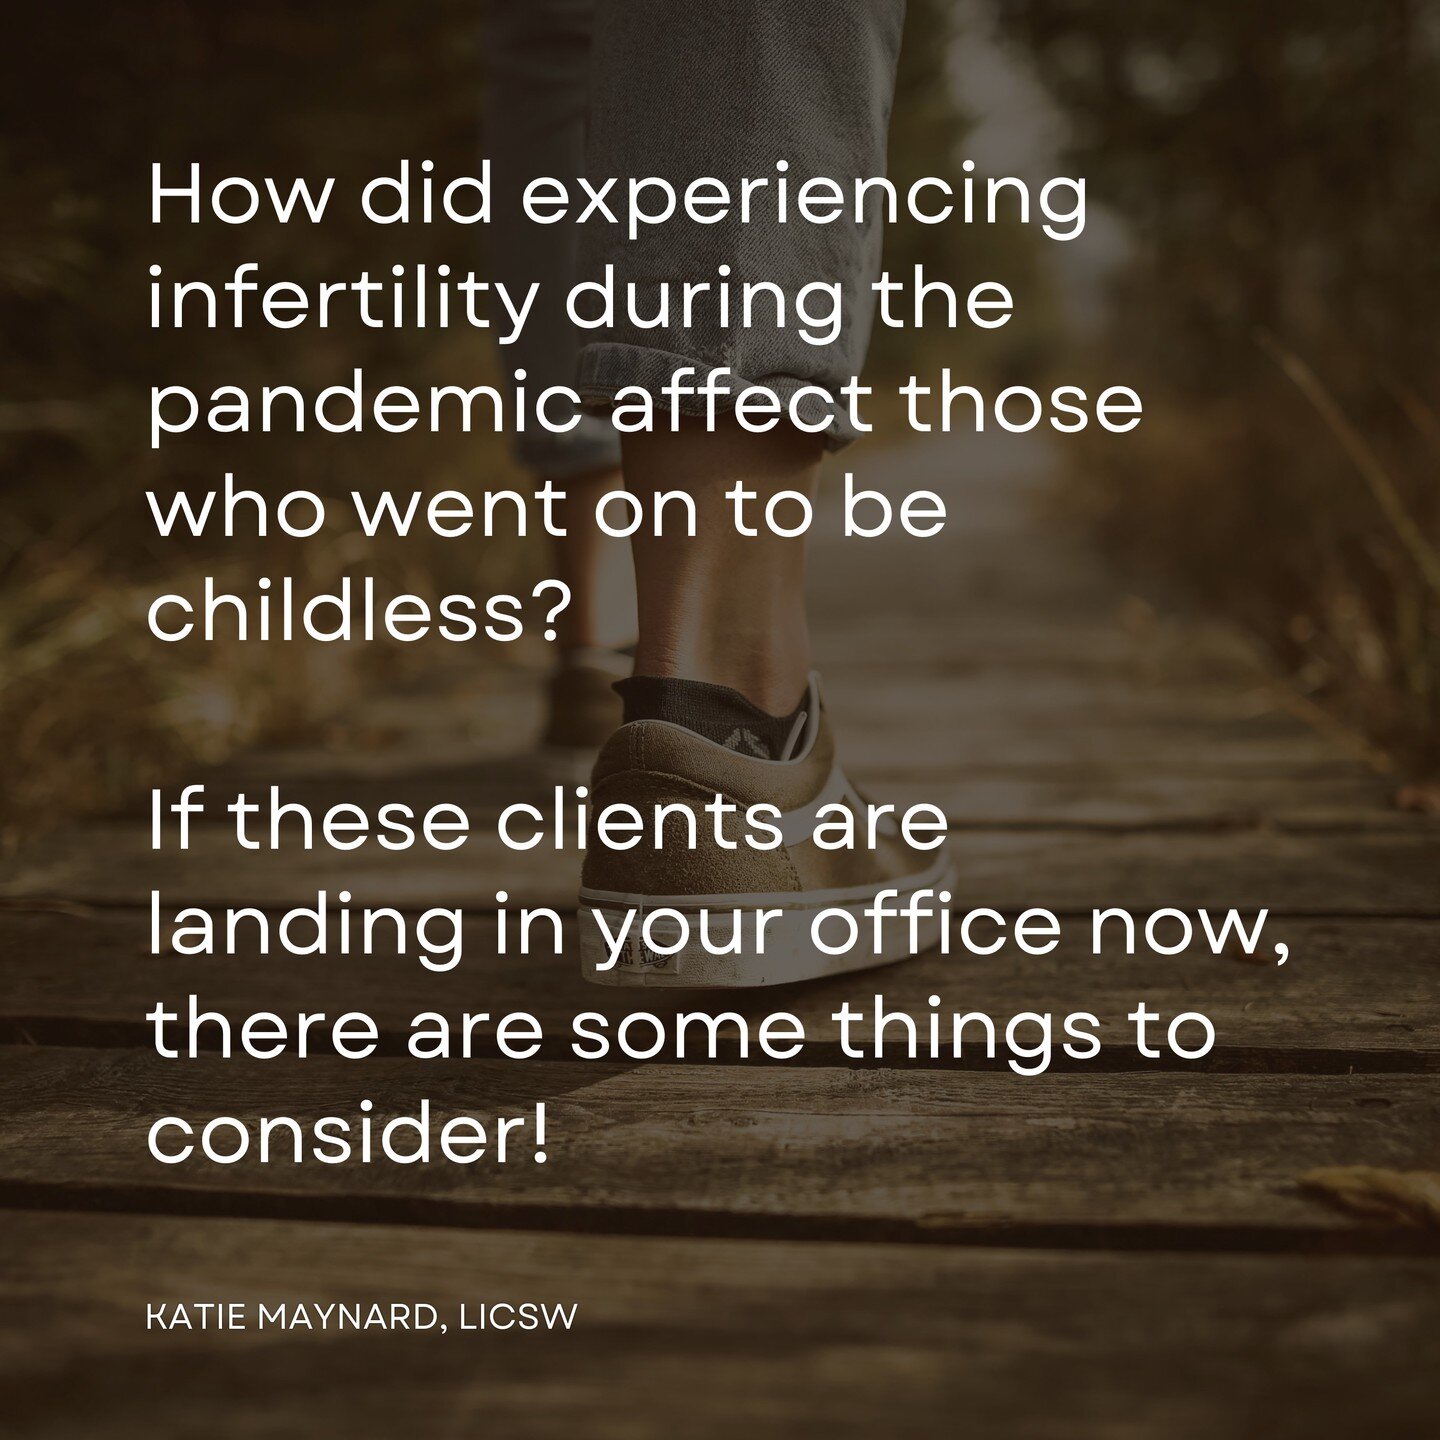 There is a lot that these clients may need to rehash and process as they are seeking mental health care. Infertility can feel devastatingly difficult and those who came out the other side without kids could have a lot of guilt, angst, or anger about 